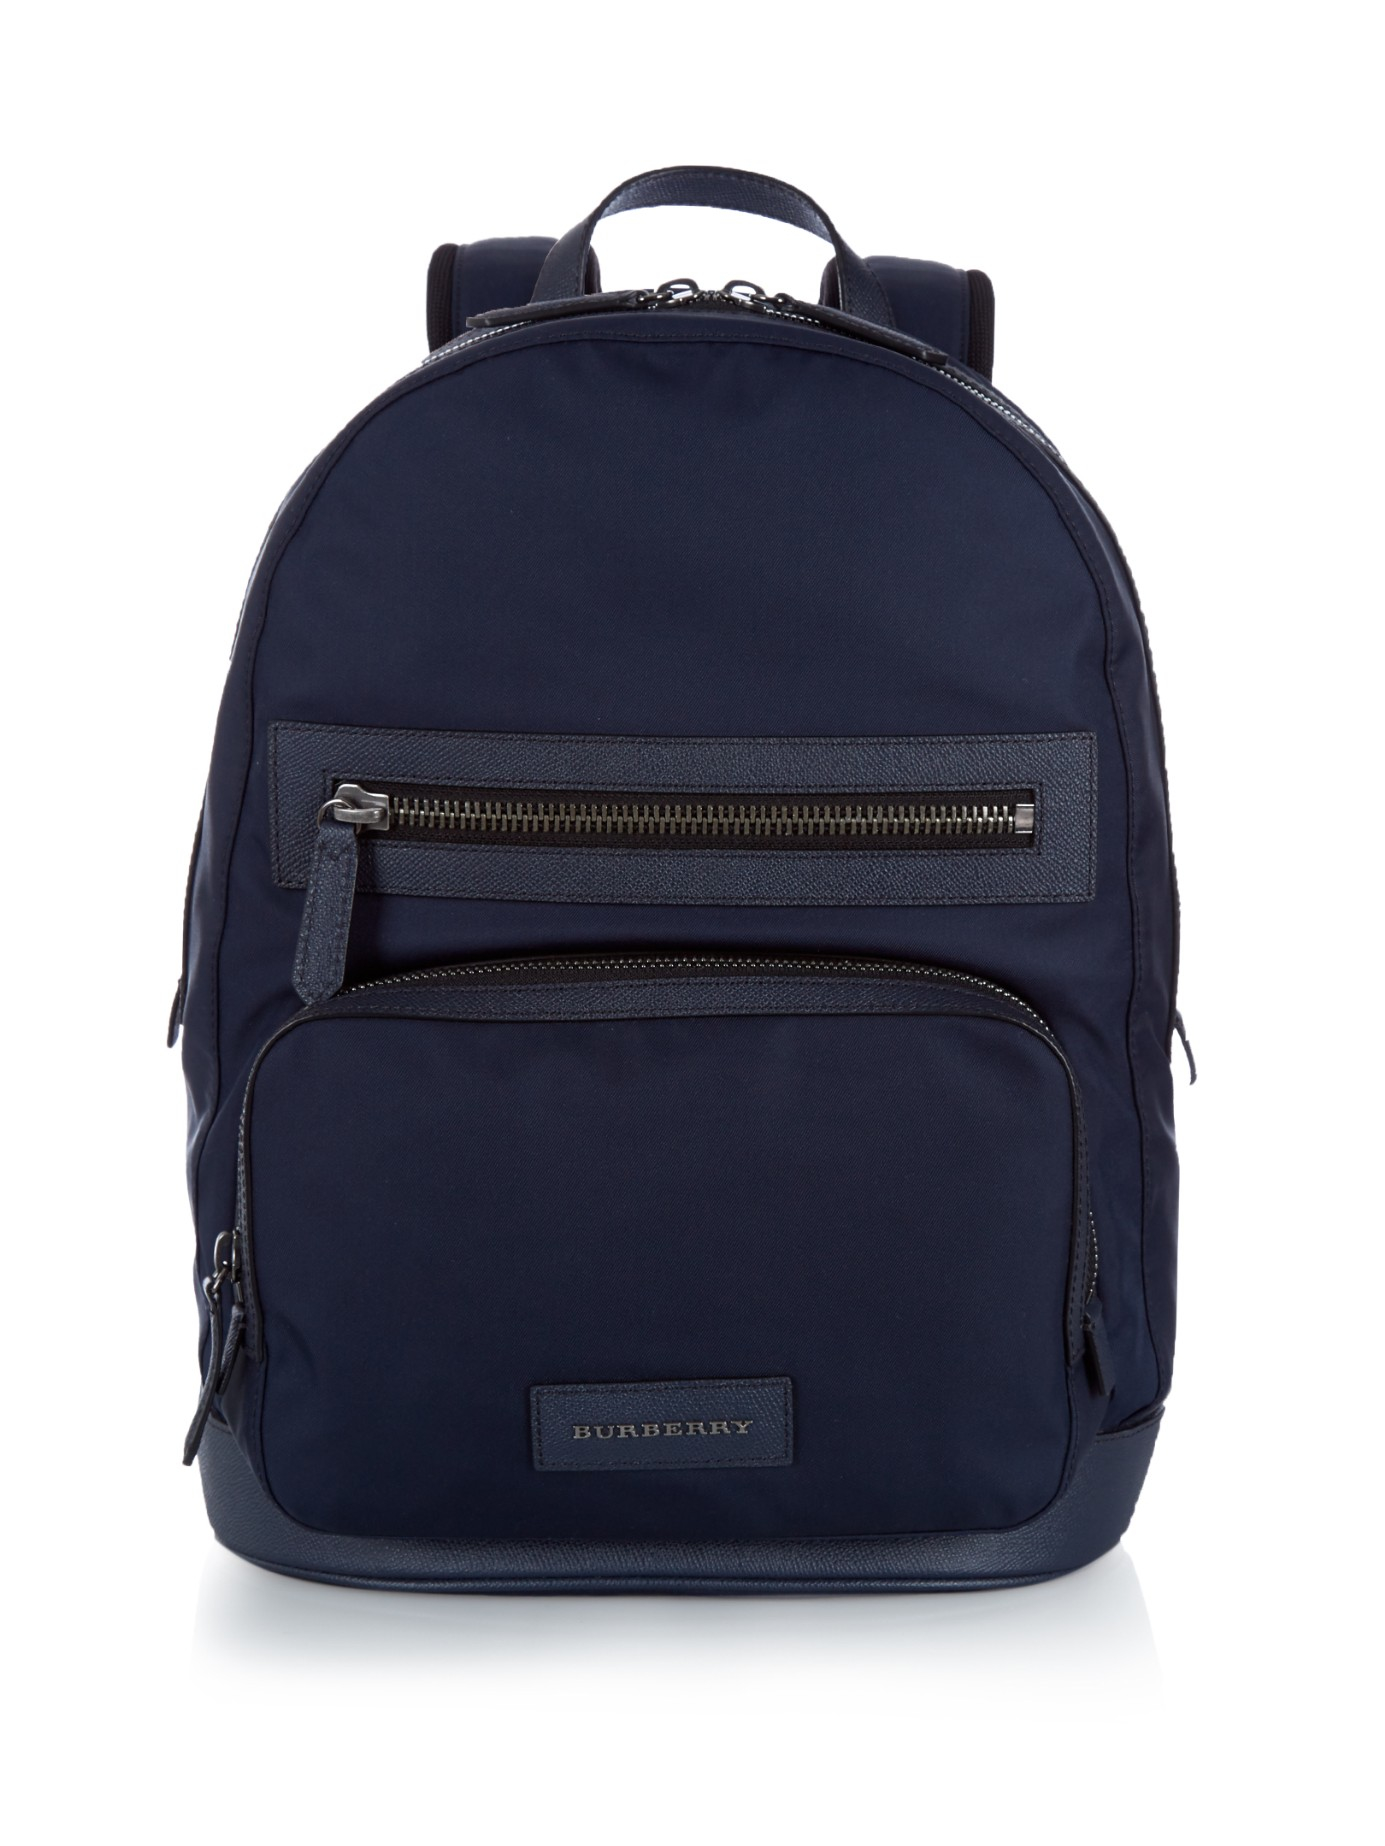 Lyst - Burberry Marden Leather-trim Backpack in Blue for Men